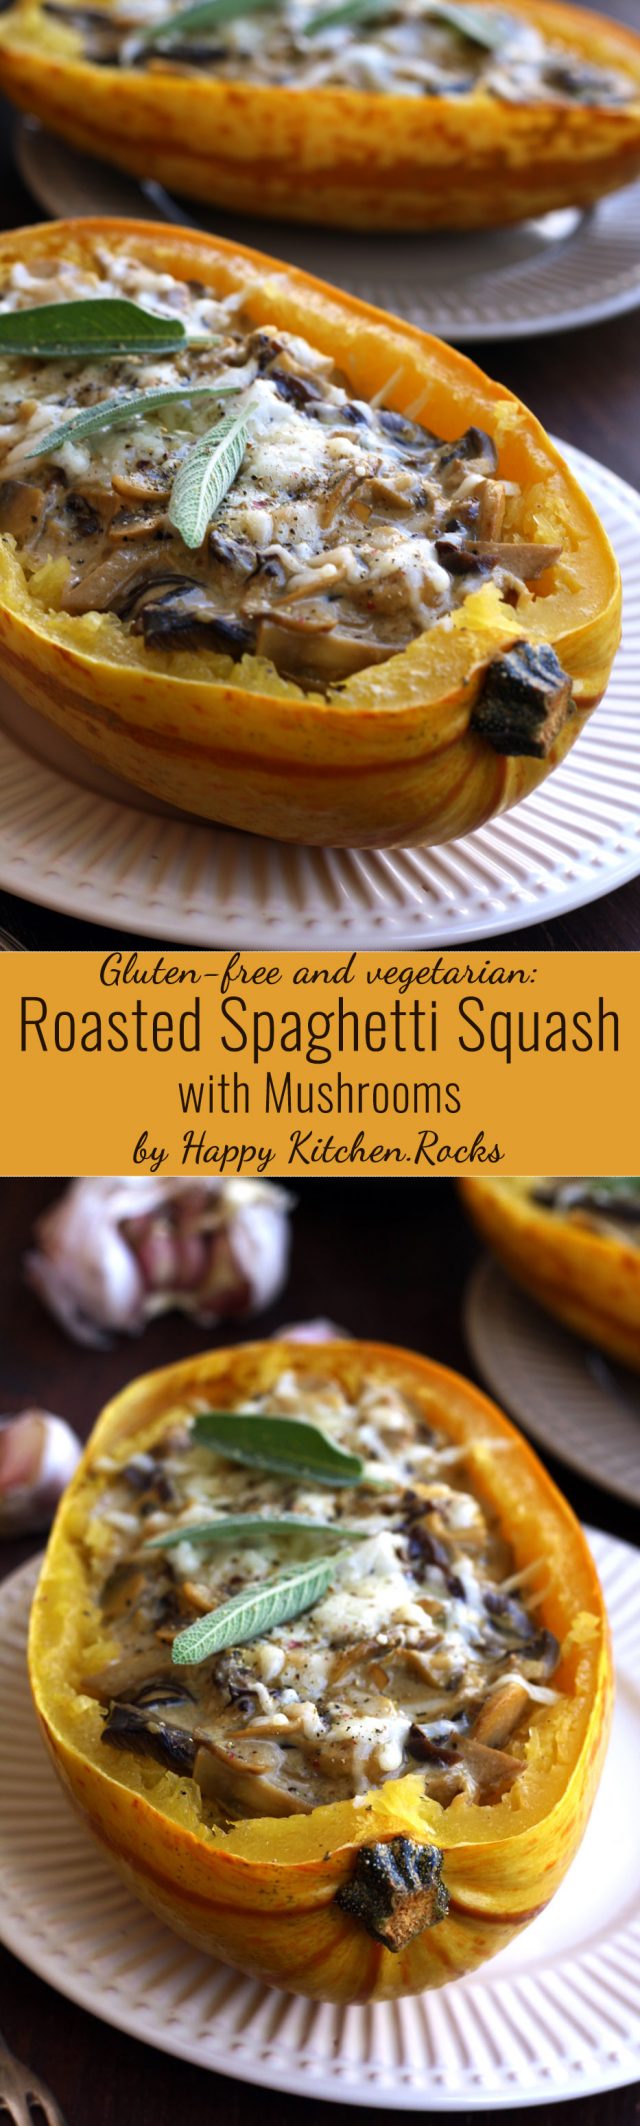 Easy and delicious roasted spaghetti squash with mushrooms made with 9 simple ingredients. Great vegetarian and gluten-free dinner recipe ready in 1 hour from start to finish!